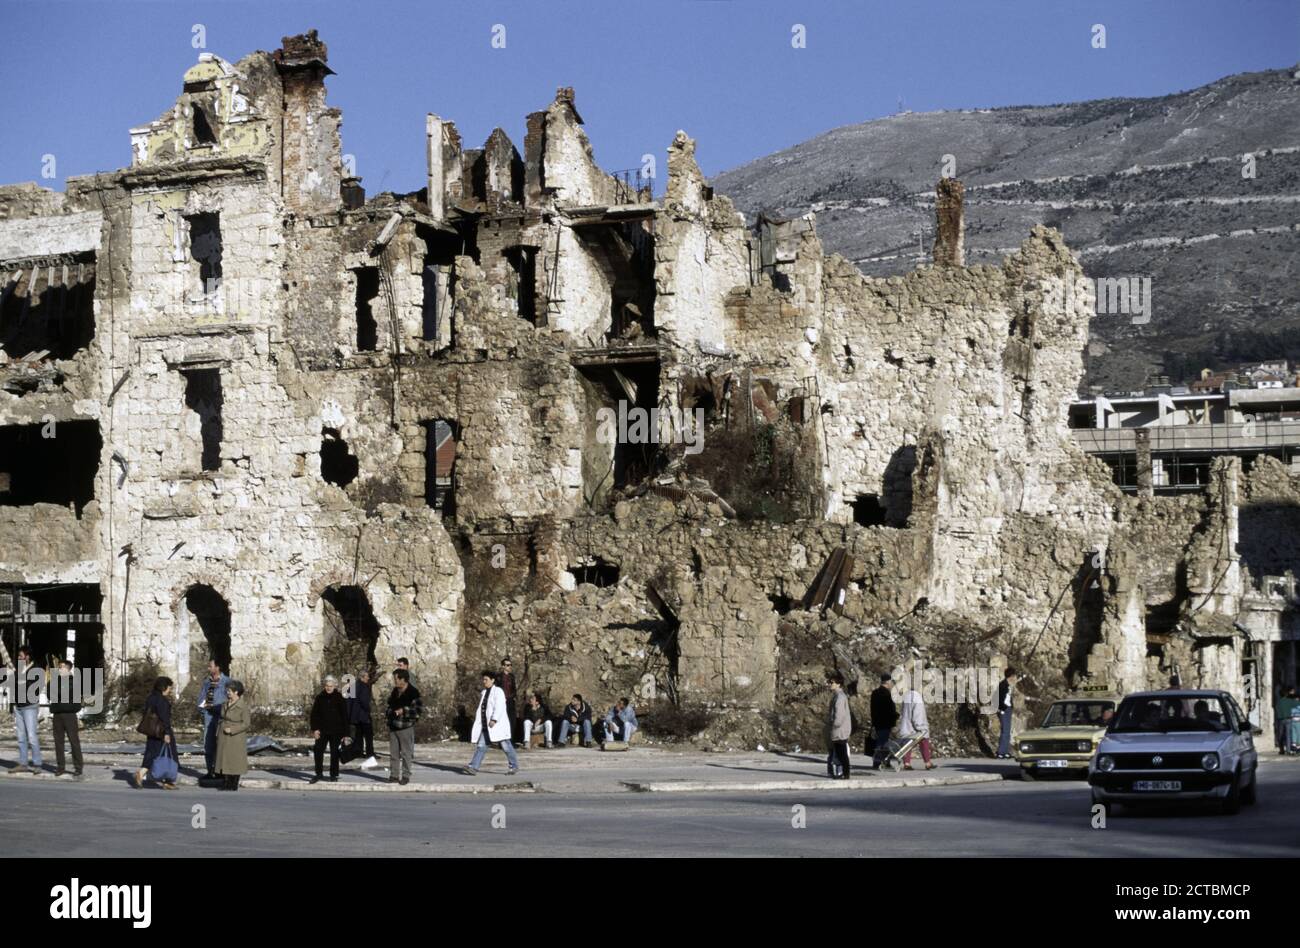 10th December 1995 During the war in Bosnia: a destroyed building at the junction of Mostarskog bataljona and Adema Buca in Mostar. Stock Photo